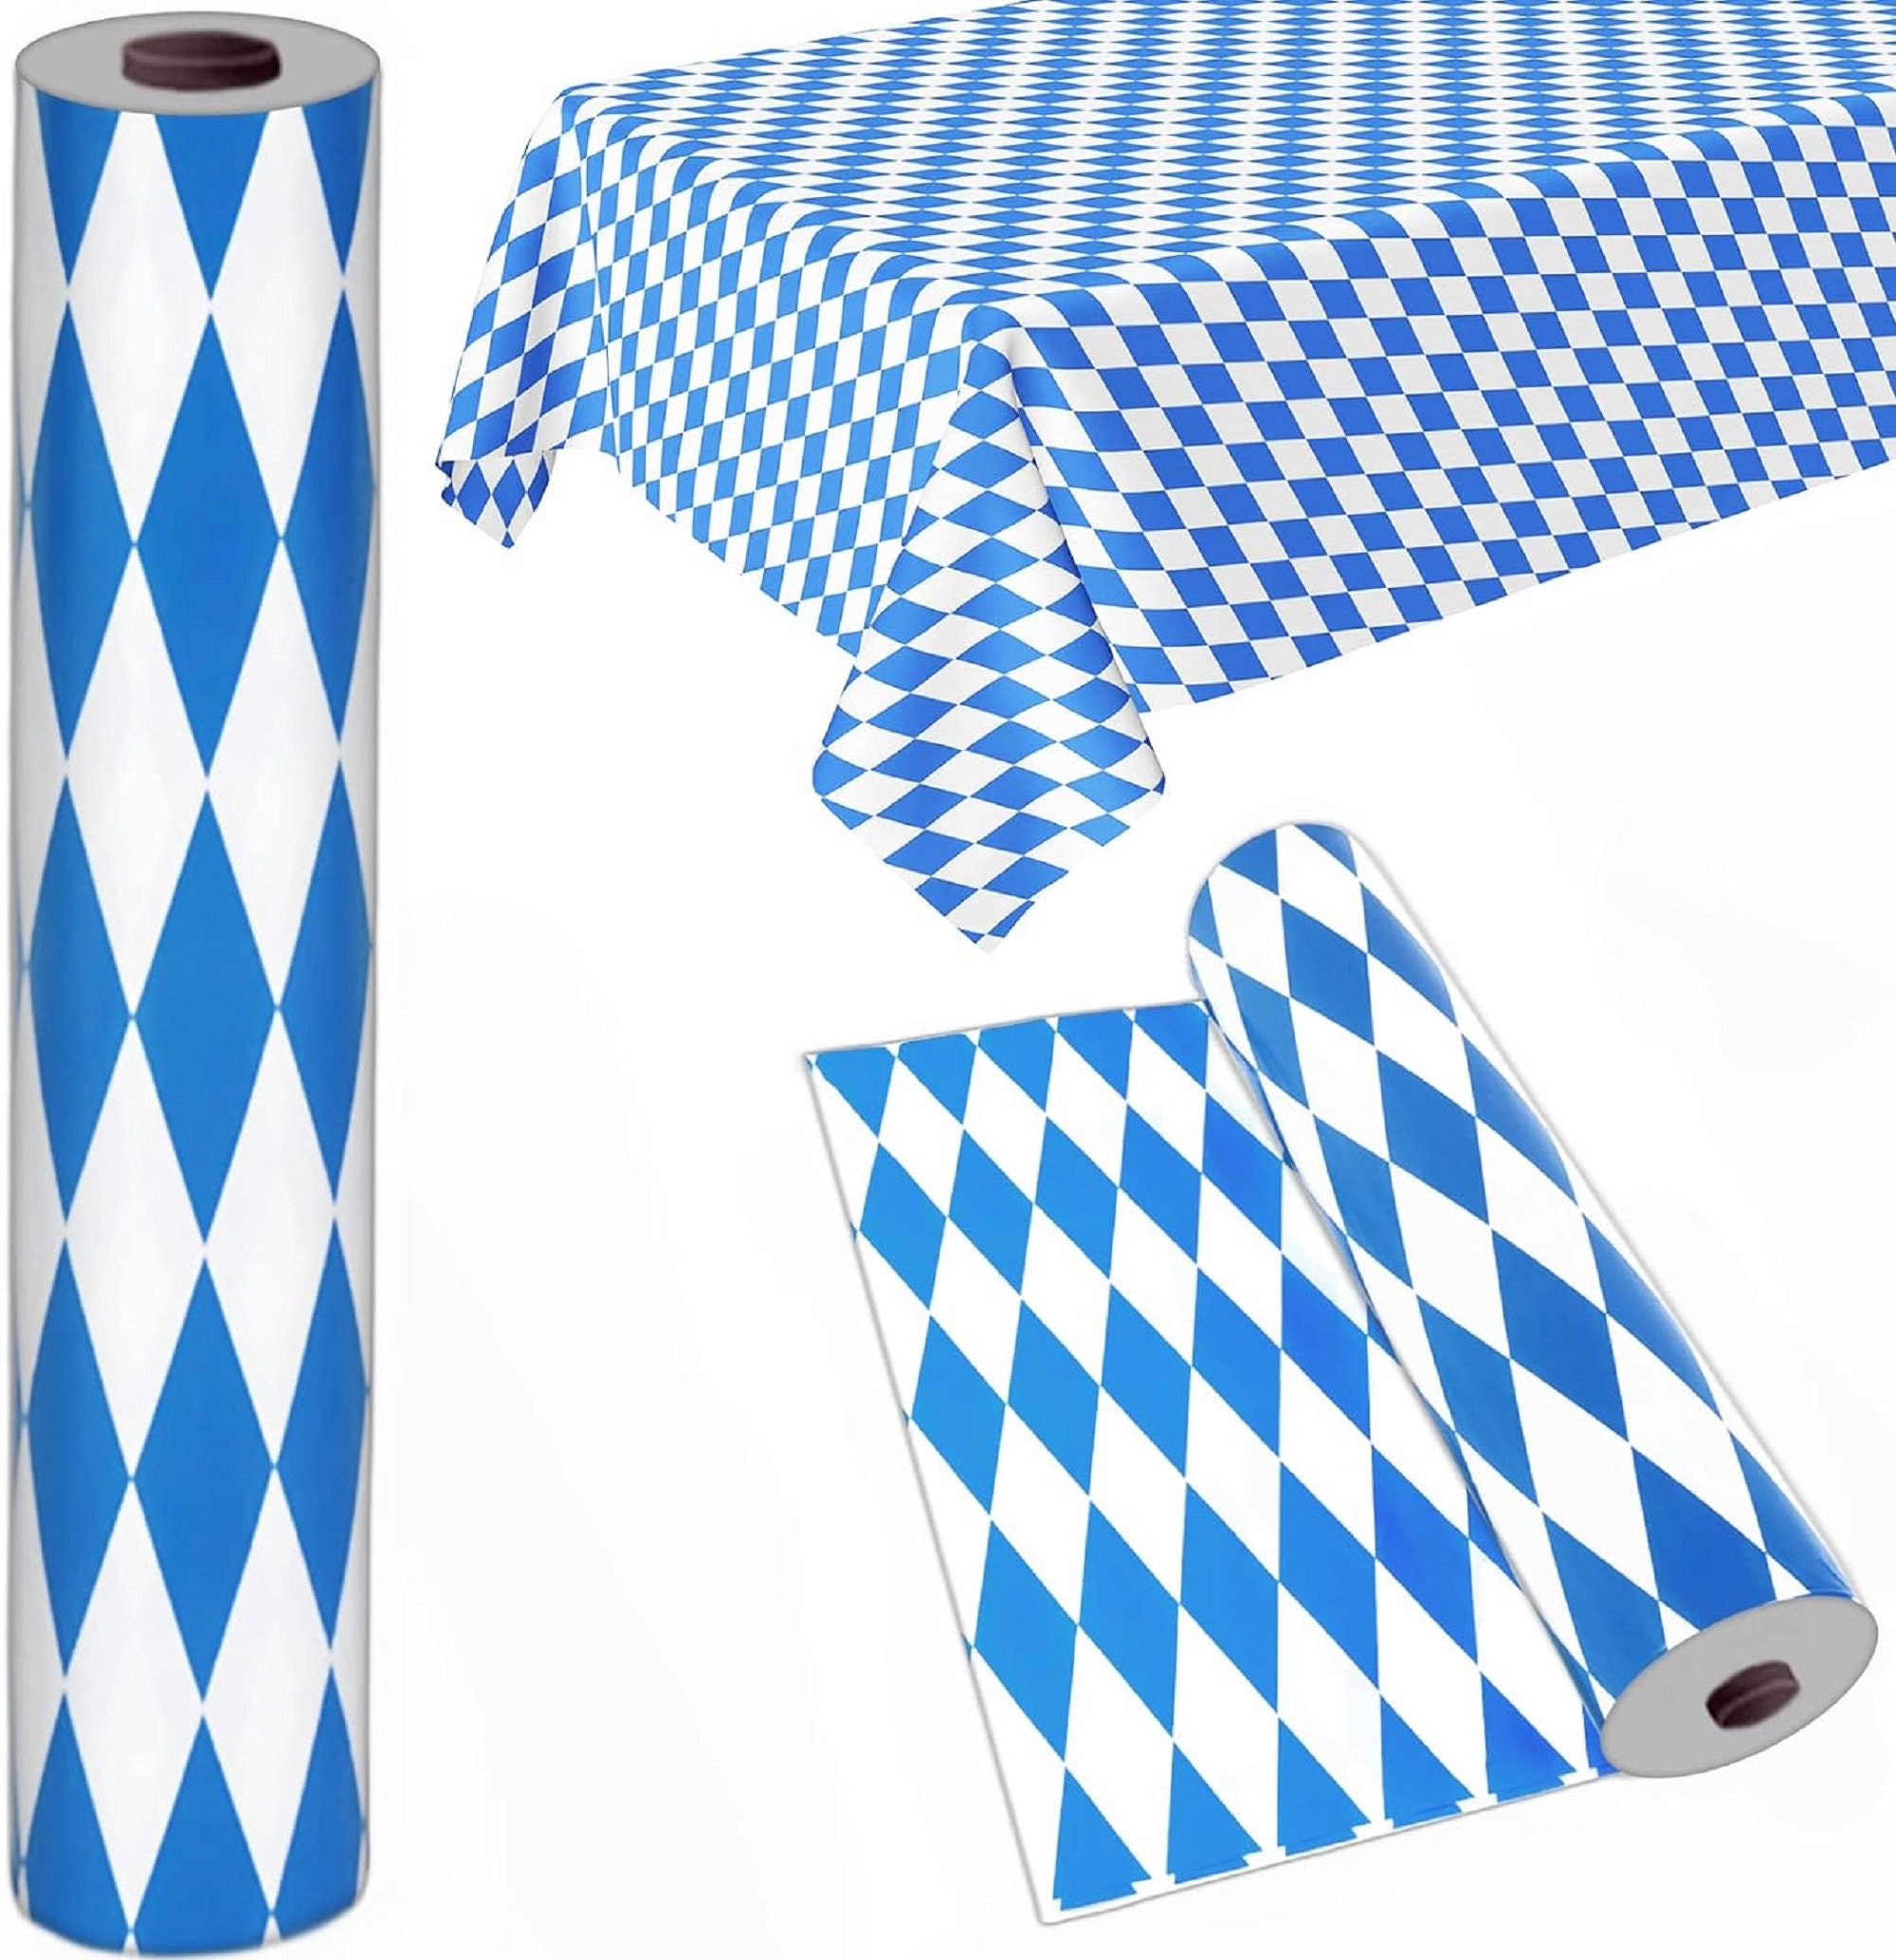 100 Feet of Awesome - Our Plastic Bavarian Check Banquet Roll Table Co